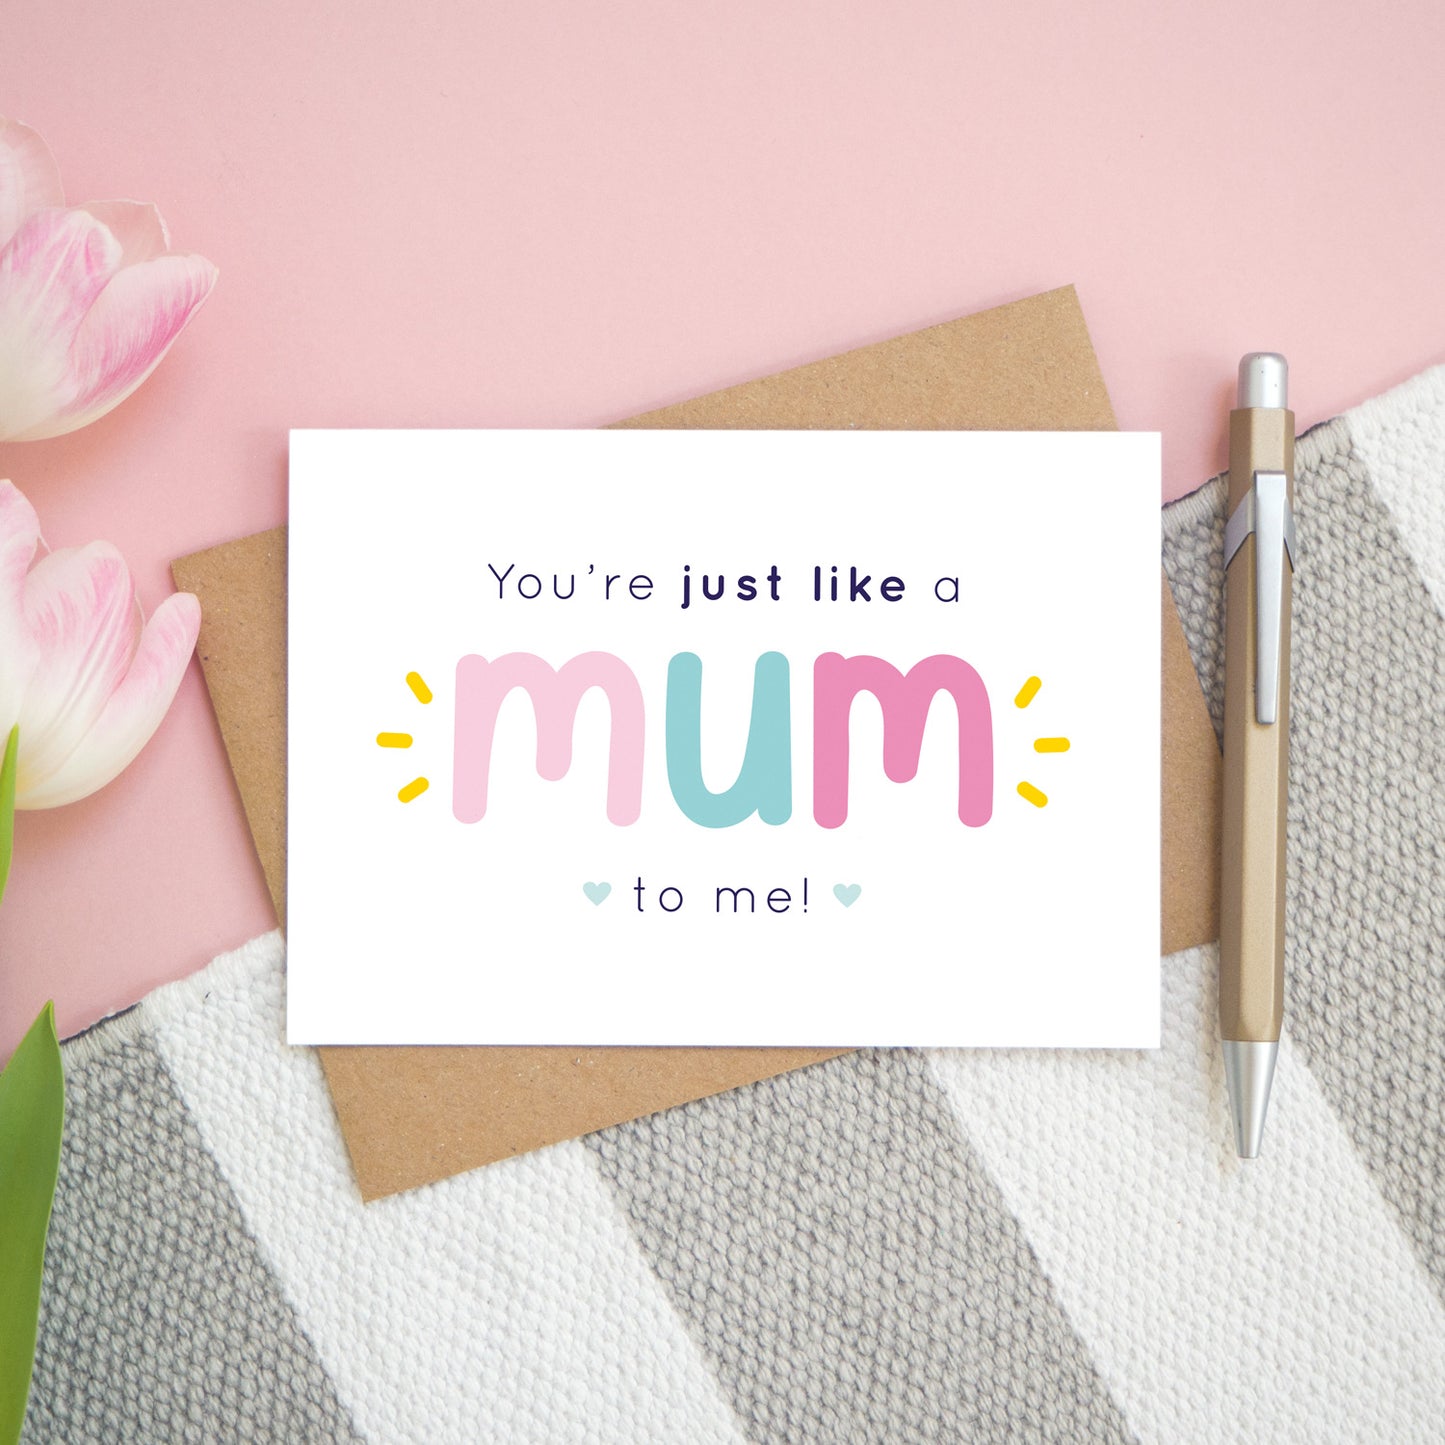 A flatlay set up of the pink and blue version of the 'you're just like a mum to me' card. It is landscape in orientation and is photographed next to a pen and pink tulips for scale.